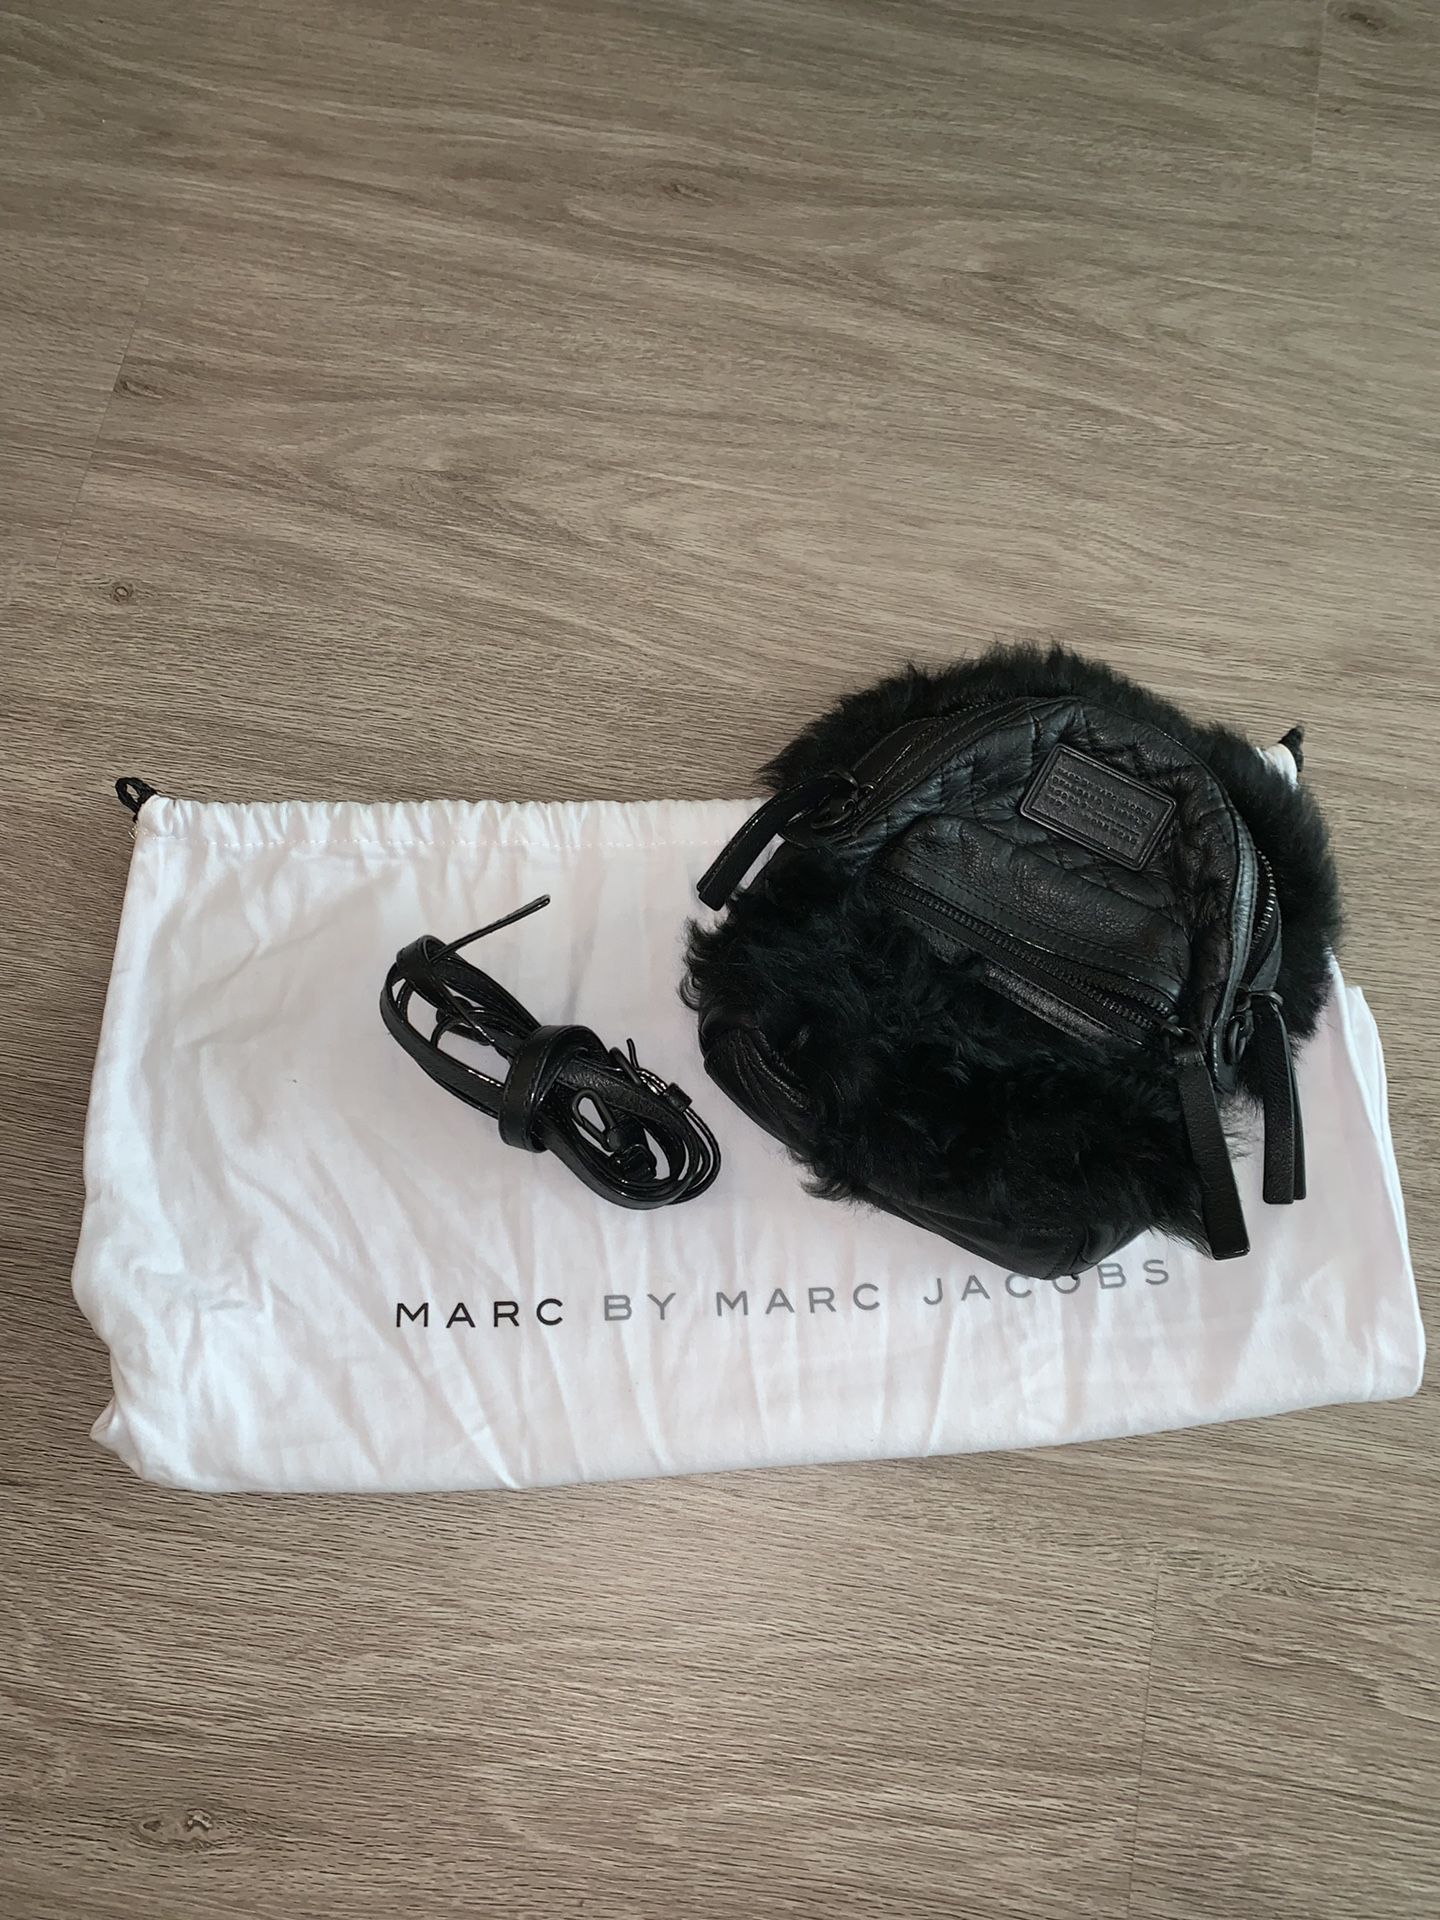 MARC BY MARC JACOBS BLACK BAG LIKE BRAND NEW